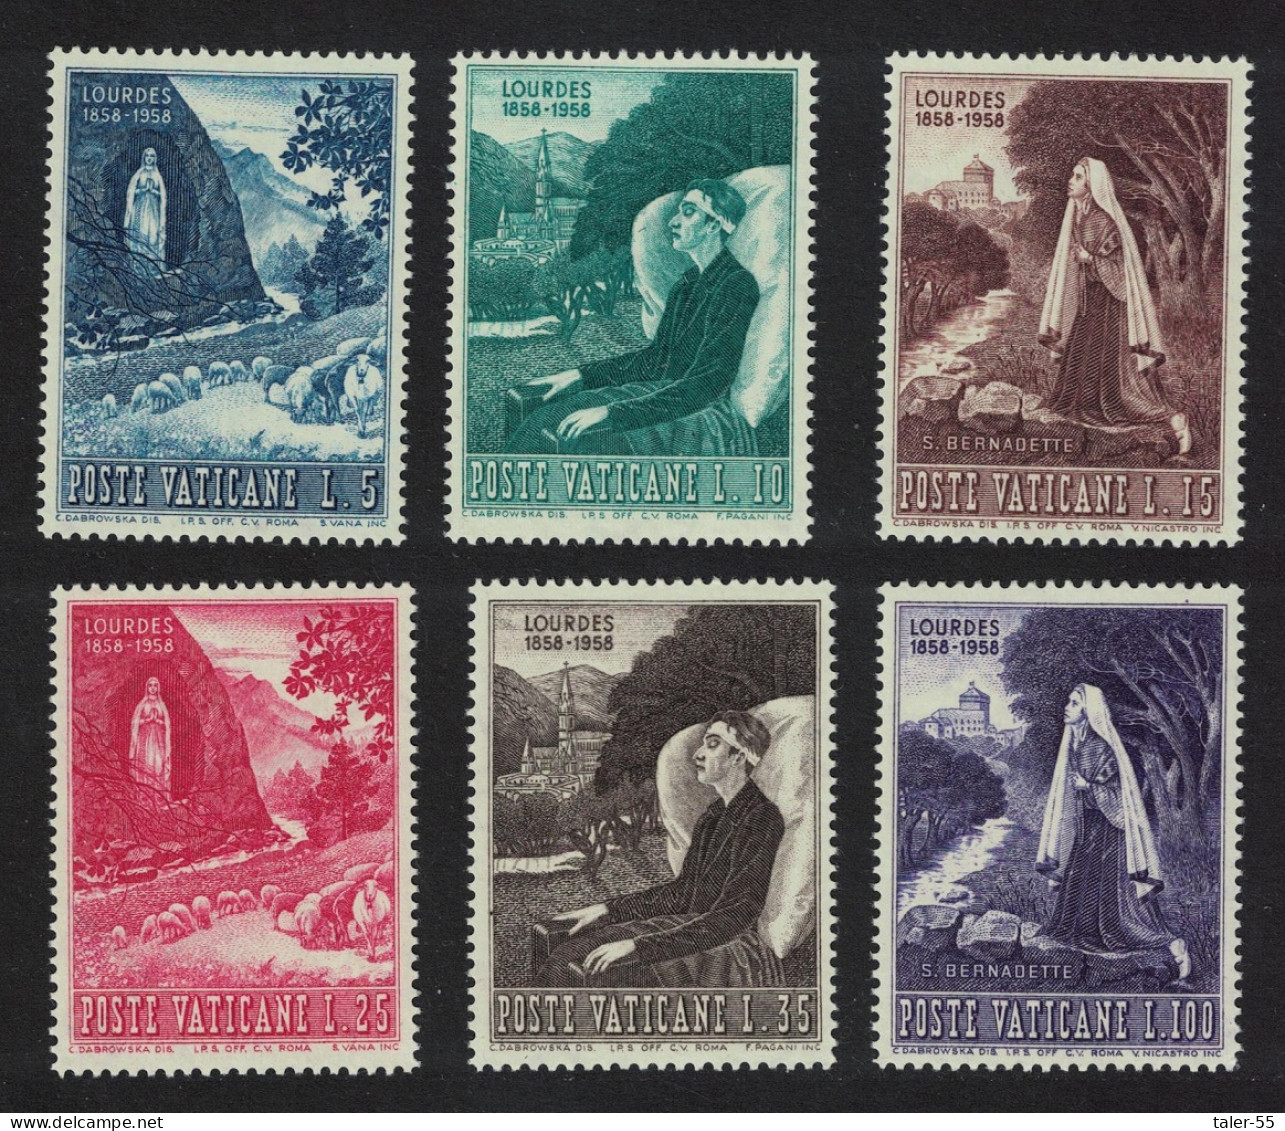 Vatican Apparition Of The Virgin Mary At Lourdes 6v 1958 MH SG#265-270 Sc#233-238 - Nuevos